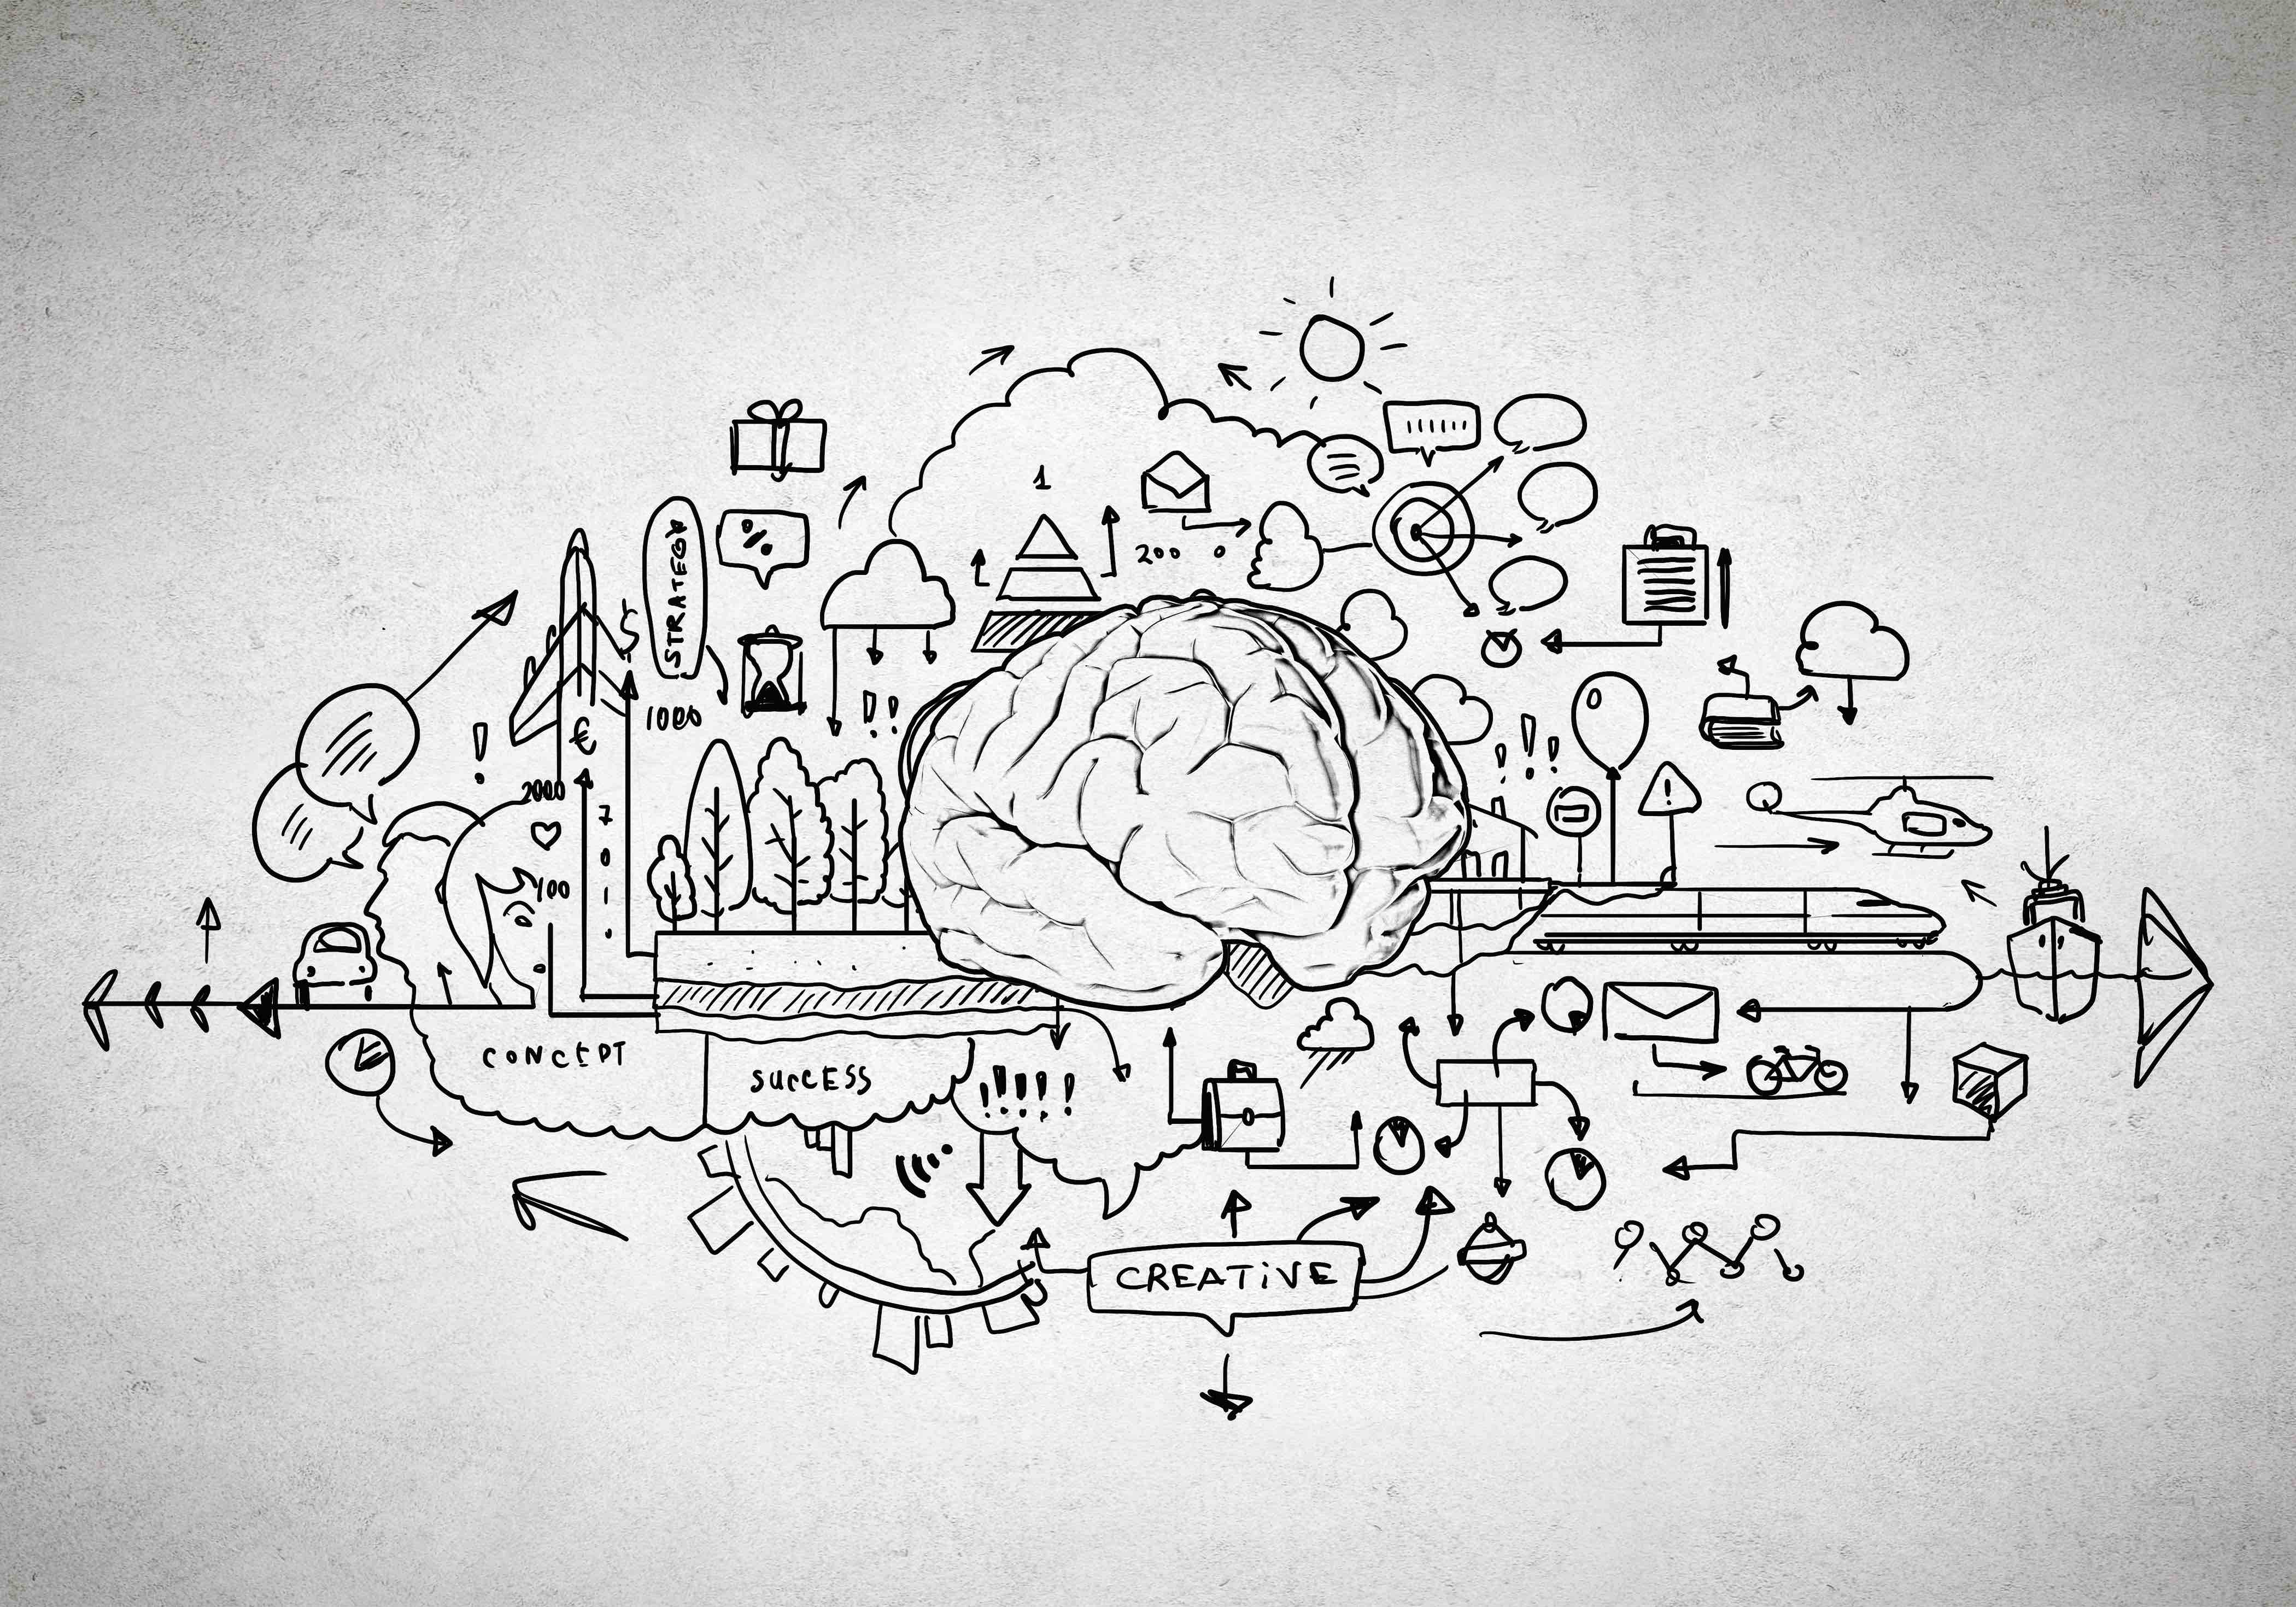 Sketch of human brain and business ideas and strategy on white background